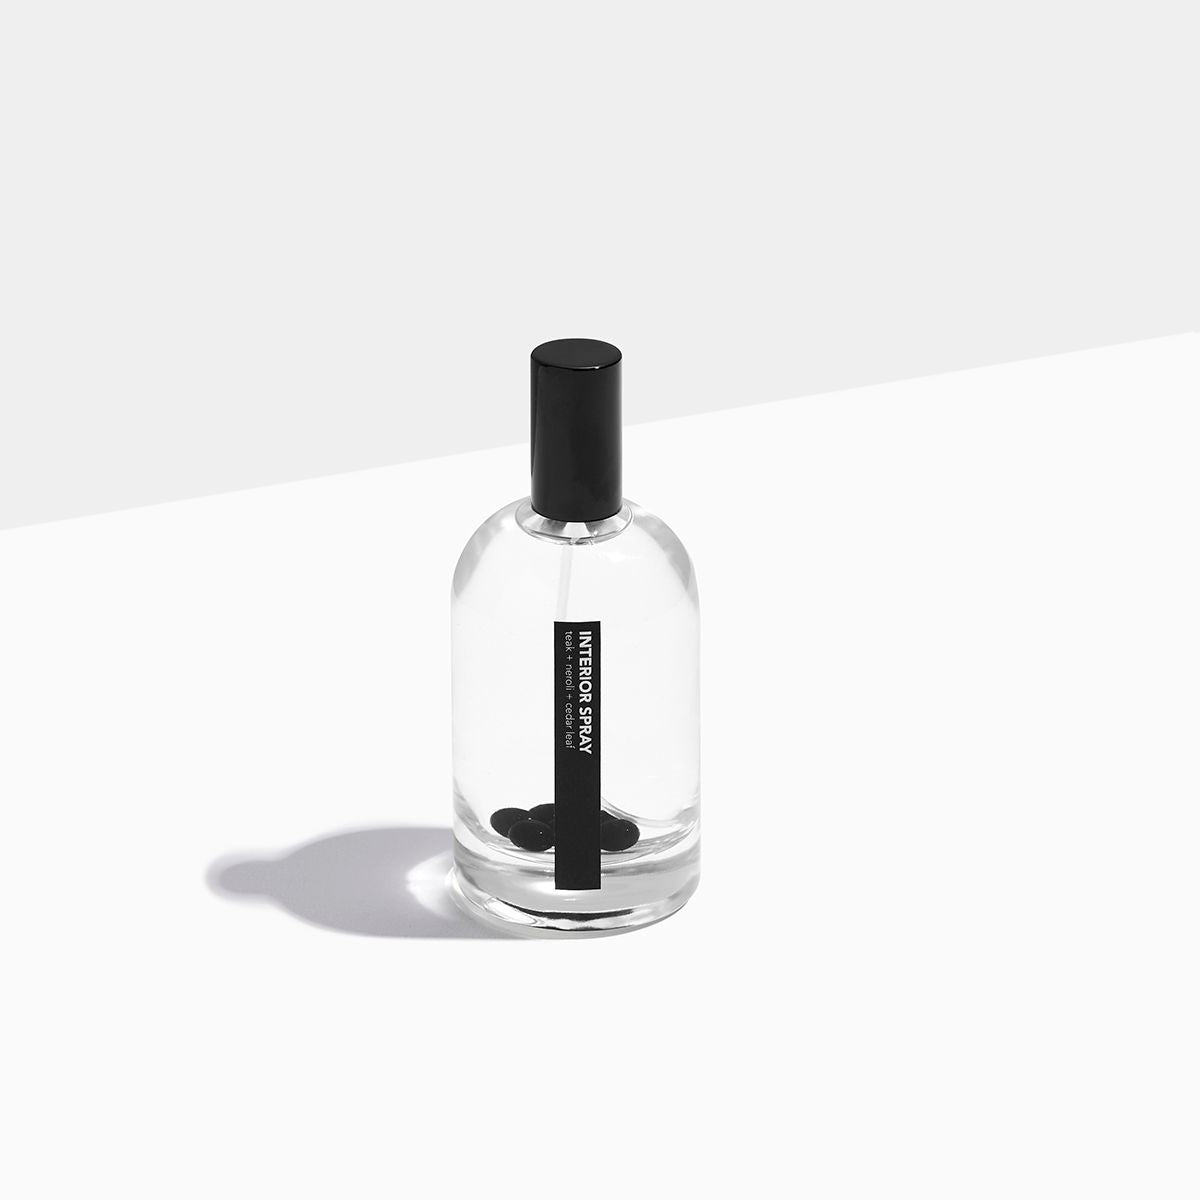 Housed in a beautiful, curved glass perfumier-inspired bottle and featuring hand-blown Black glass spheres, Fazeek's Interior Spray's an absolute delight to the senses and is perfect for refreshing and rejuvenating any room